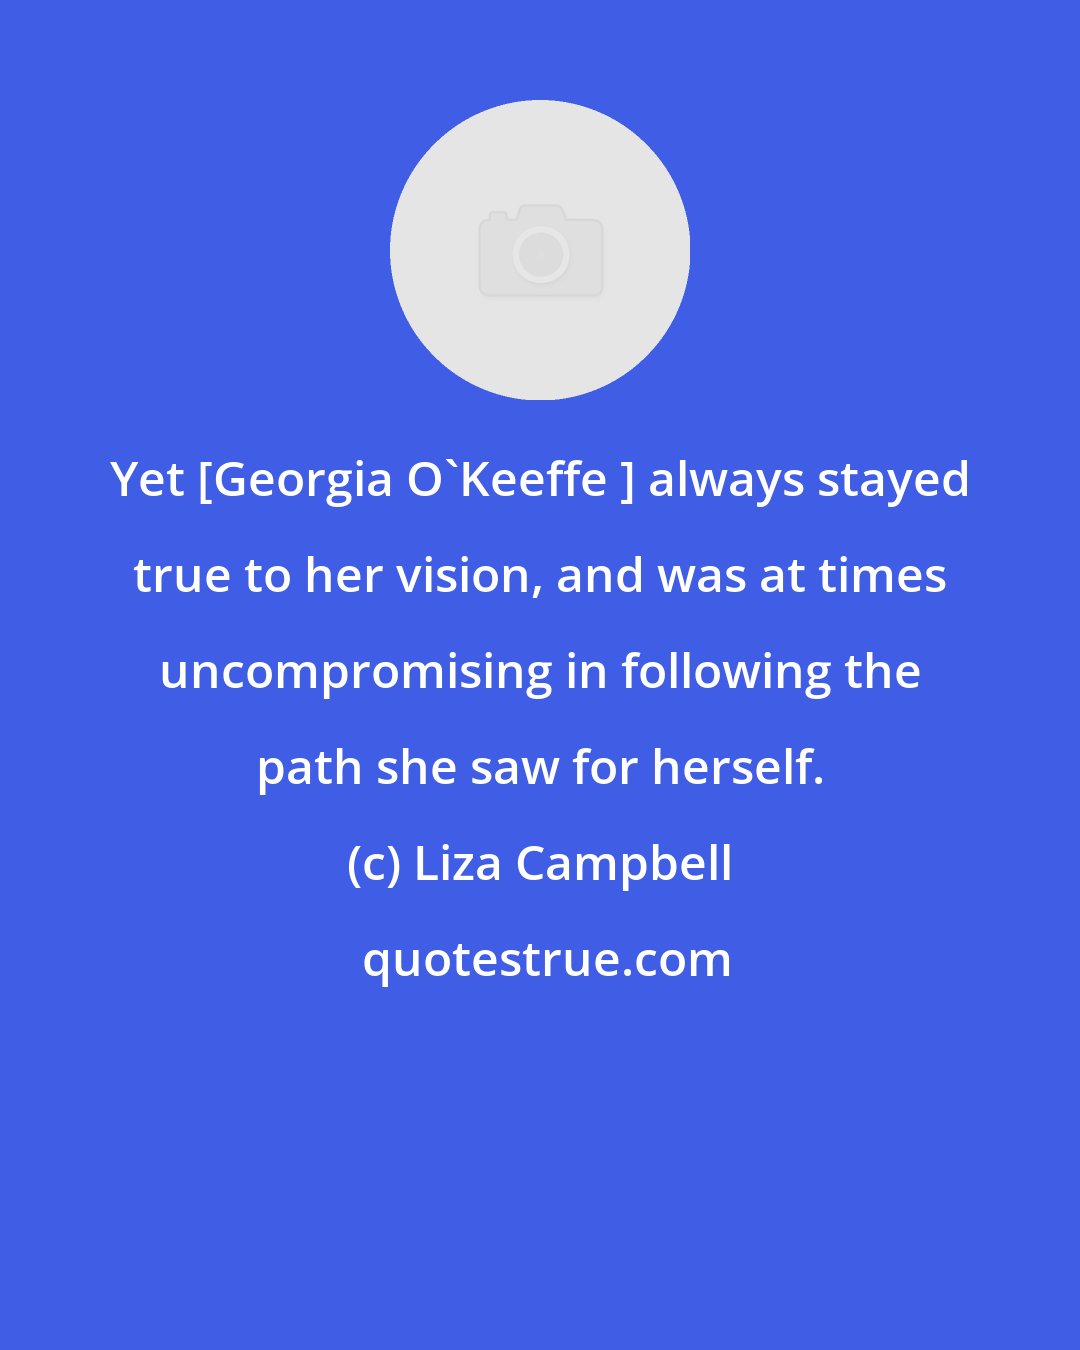 Liza Campbell: Yet [Georgia O'Keeffe ] always stayed true to her vision, and was at times uncompromising in following the path she saw for herself.